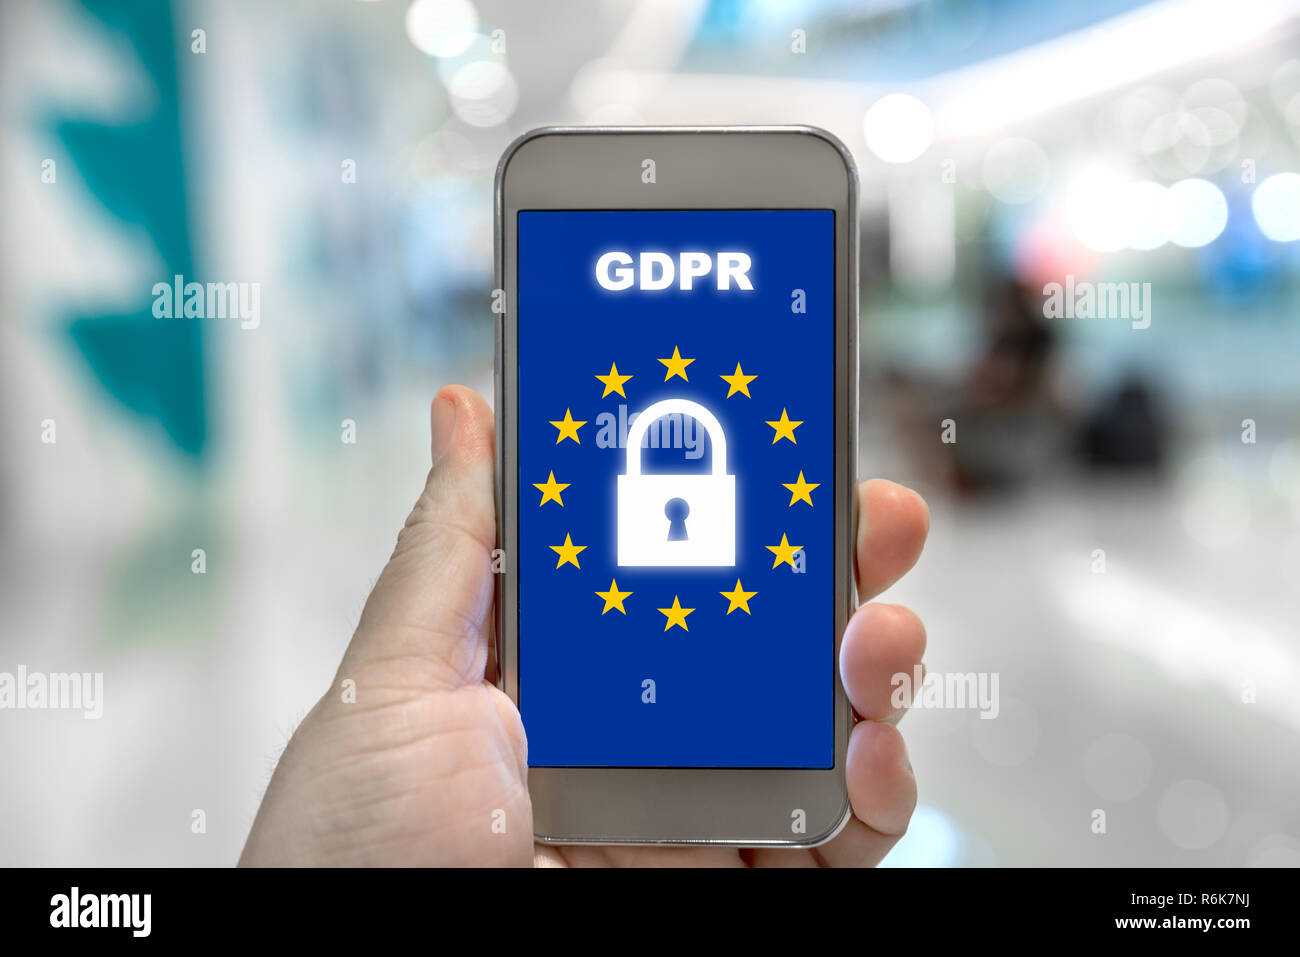 General Data Protection Regulation (GDPR) on mobile phone. Cyber security and privacy business internet technology Concept. Stock Photo